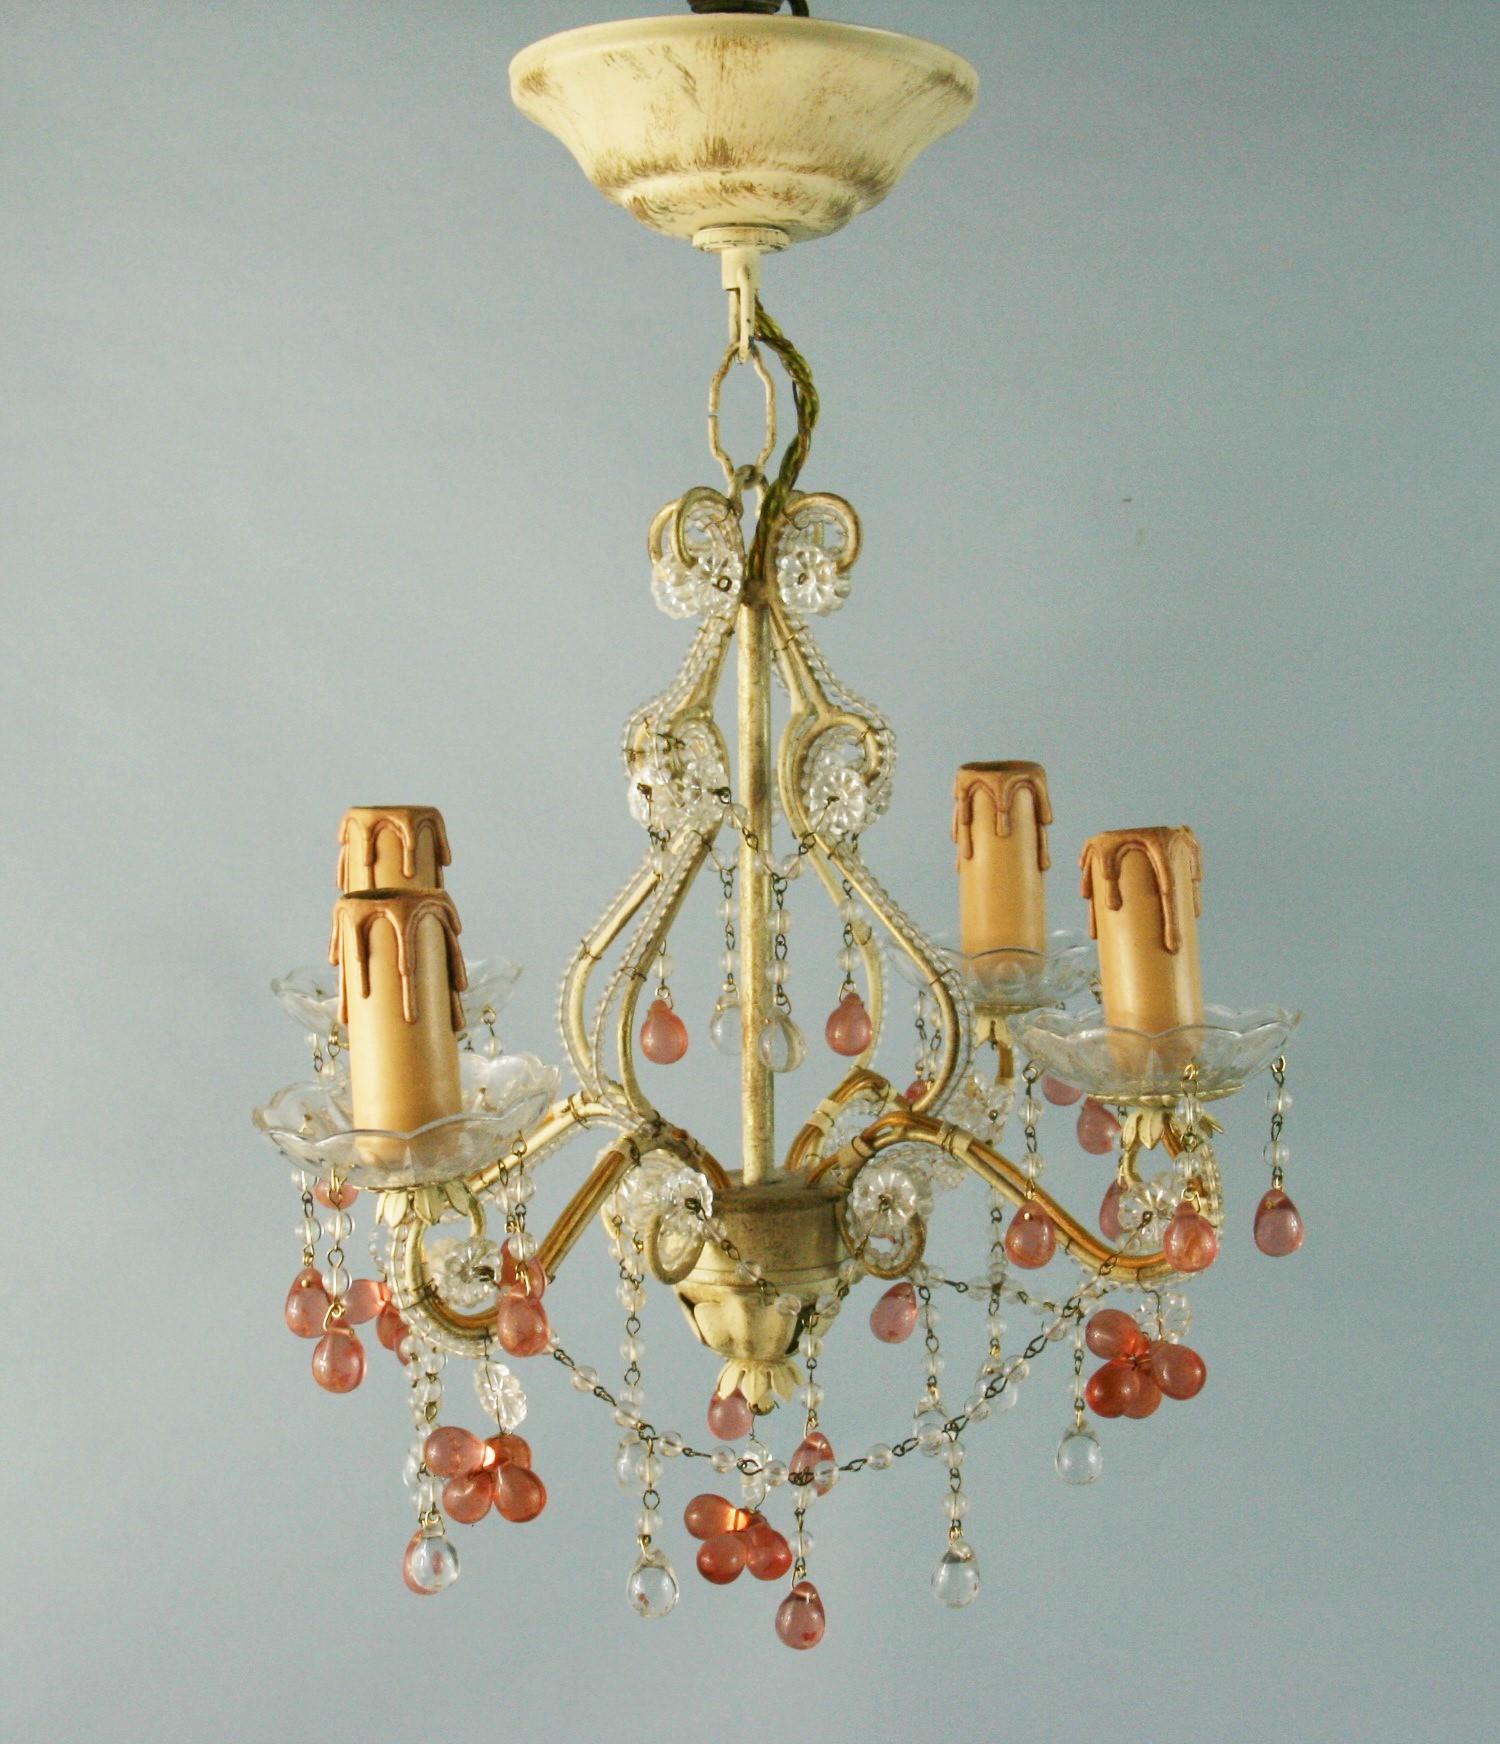 Italian Beaded Glass 4 light Chandelier with Rose Grape Drops 1960's In Good Condition For Sale In Douglas Manor, NY